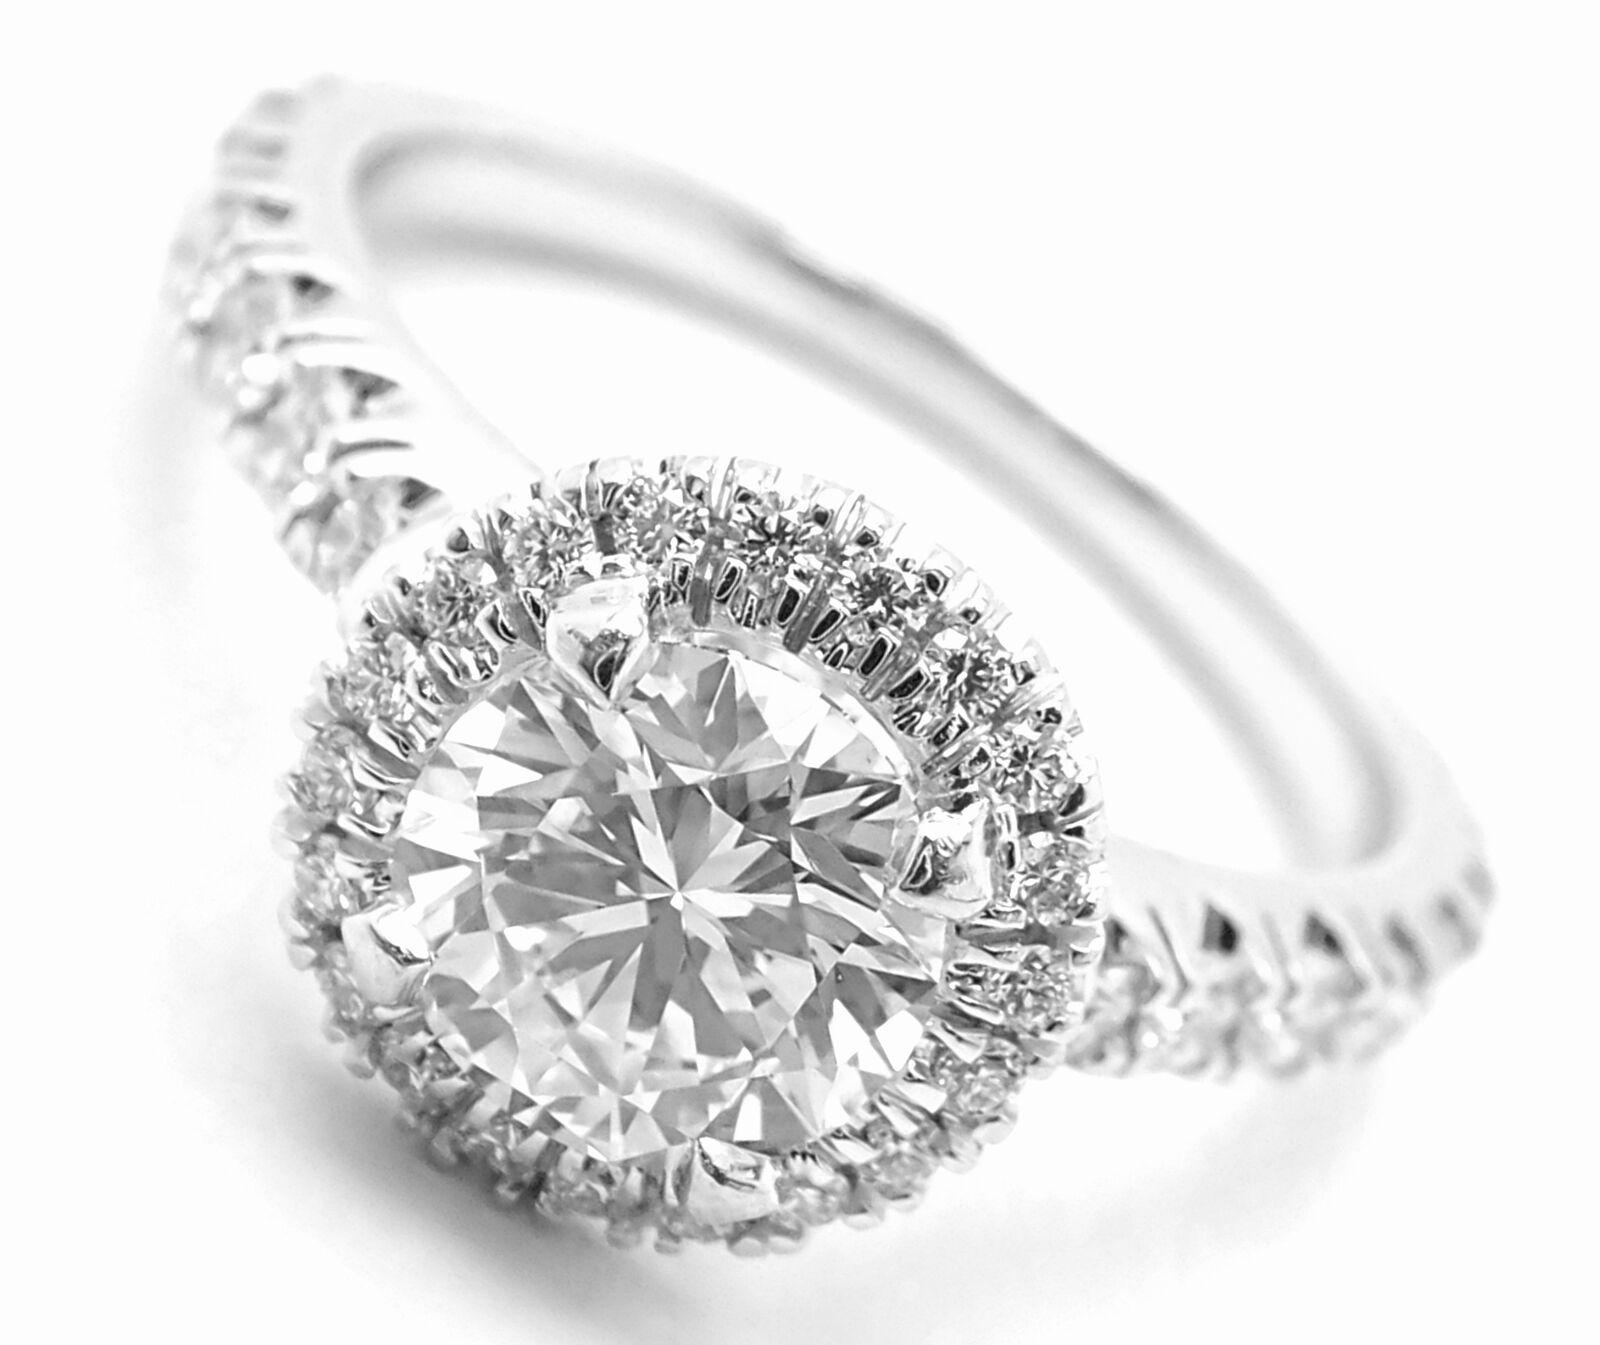 Platinum Diamond Destinee Engagement Solitaire Ring by Cartier. 
With 1 round brilliant cut diamonds VS2 clarity, D color total weight approx. .72ct
39 small round brilliant cut diamonds VS1 clarity, E color total weight approximately .40ct
This